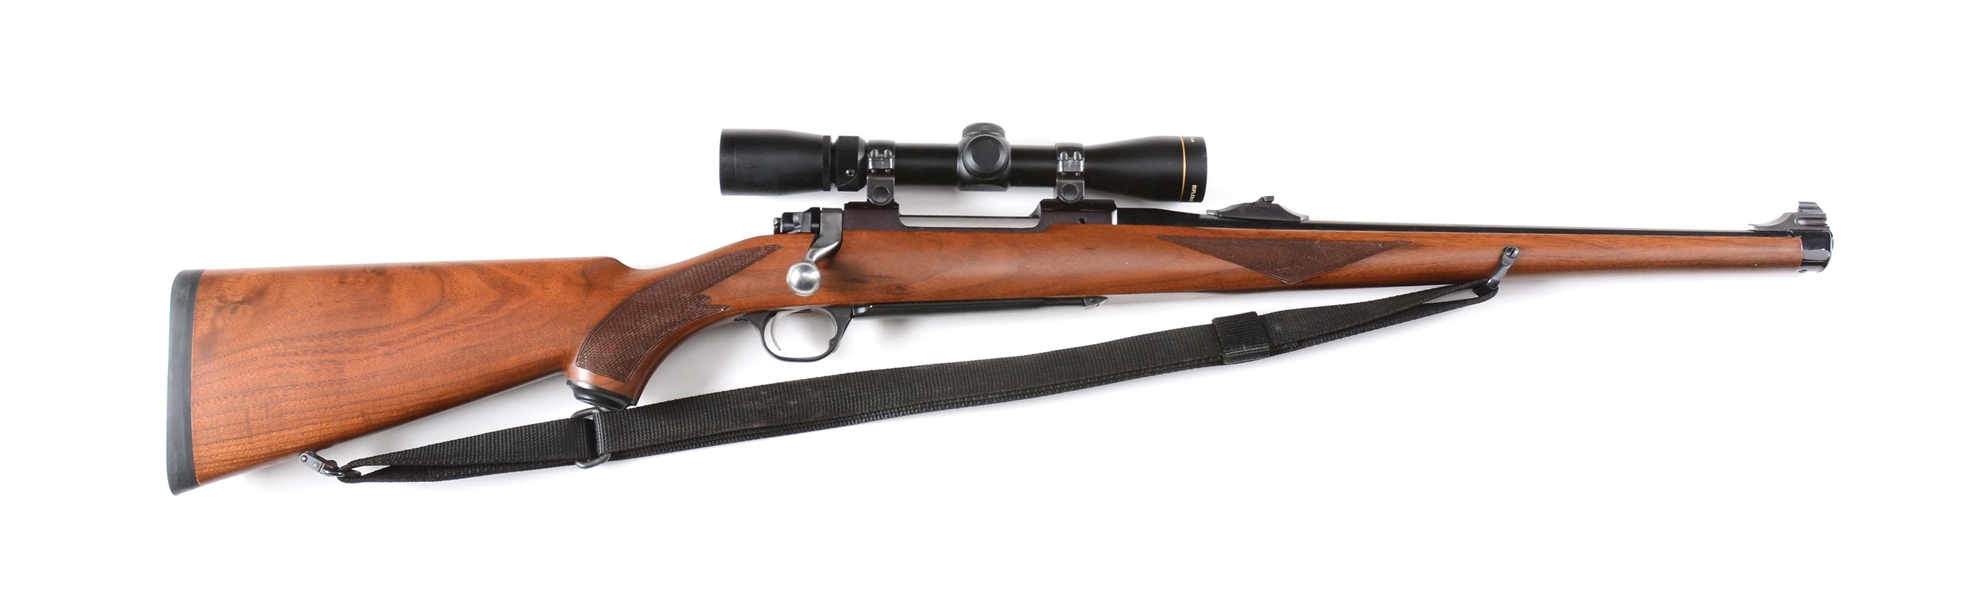 (M) RUGER M77MKII RSI BOLT ACTION RIFLE .30-06 WITH LEUPOLD SCOPE.